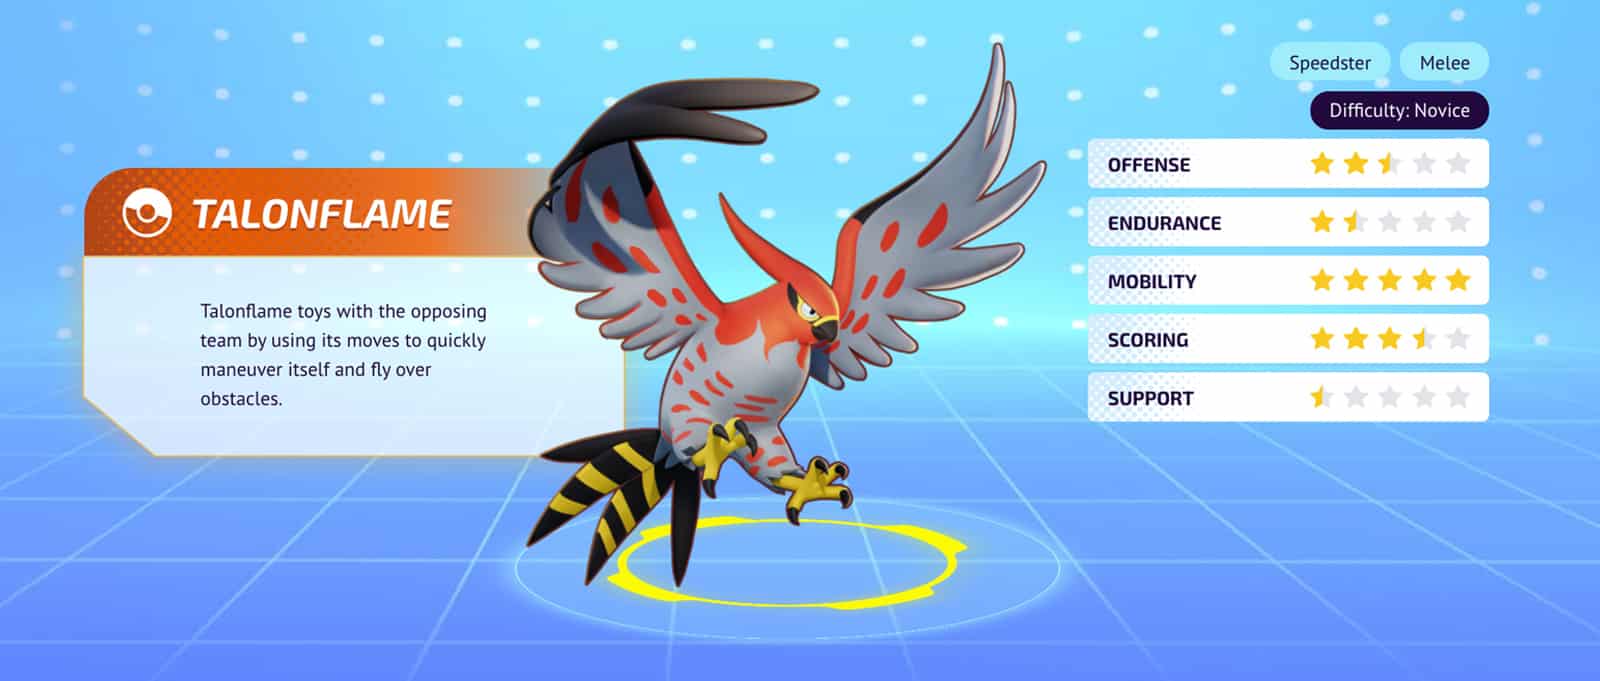 Talonflame stats